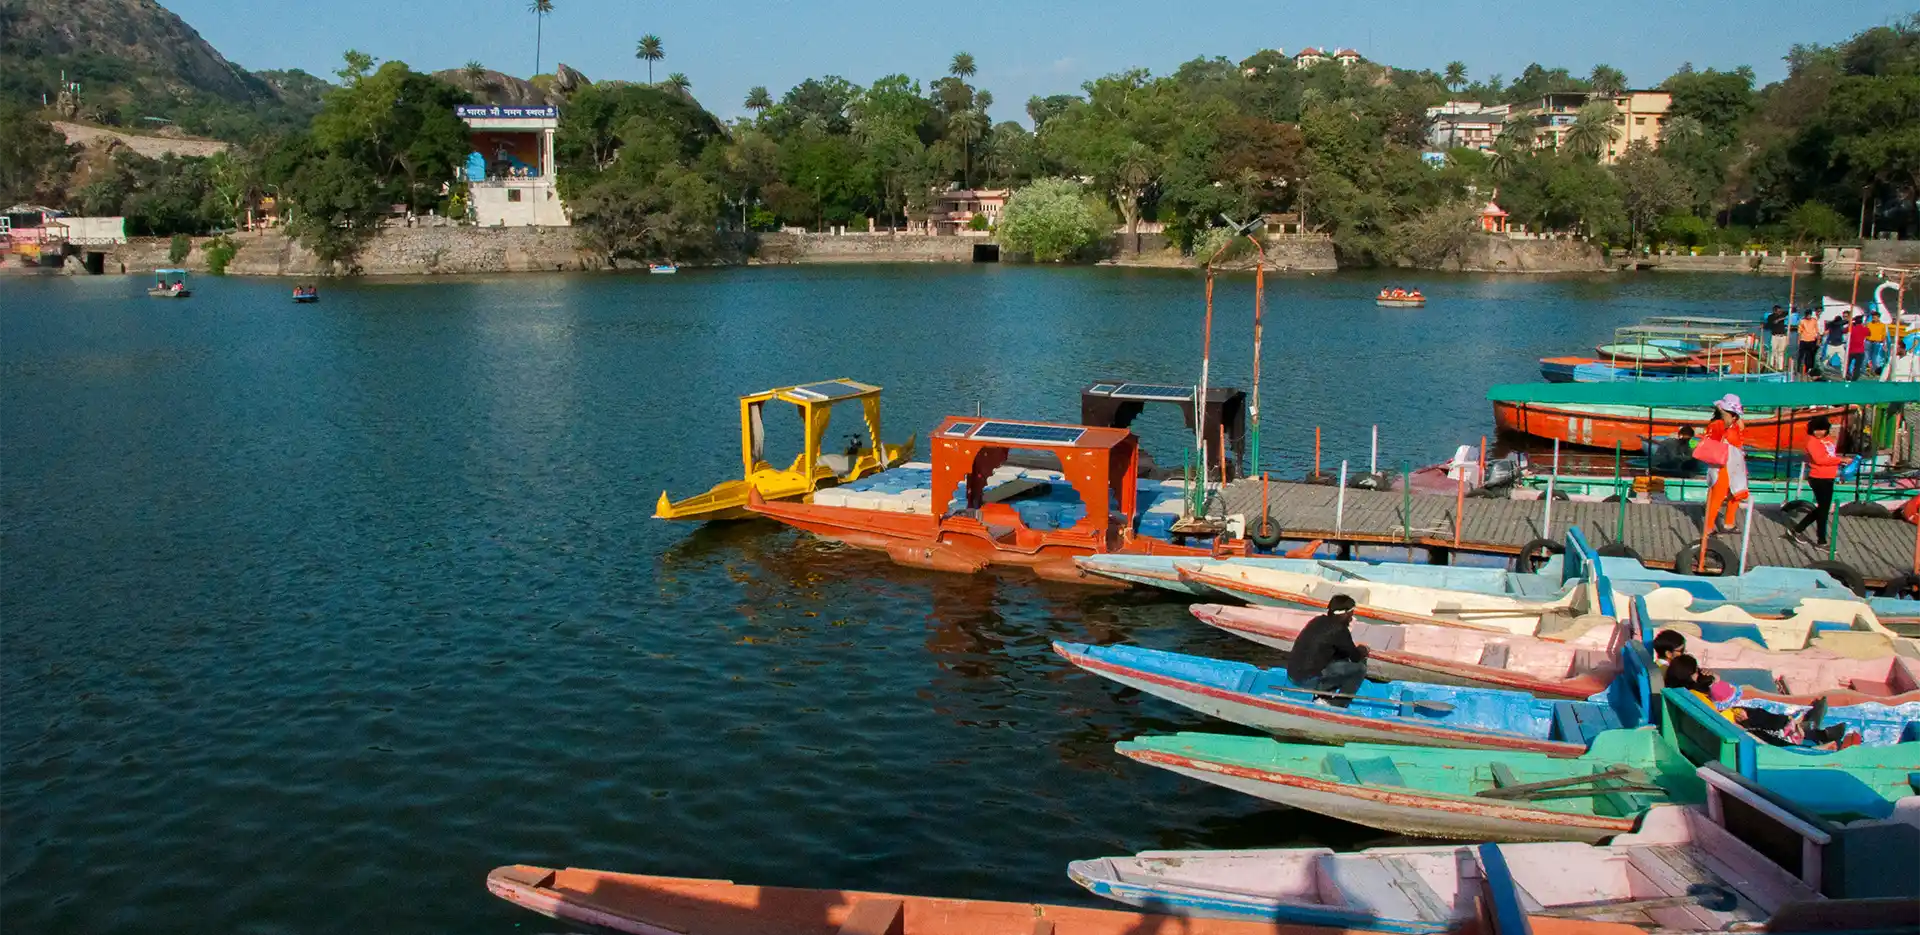 6 Things to do in Mount Abu